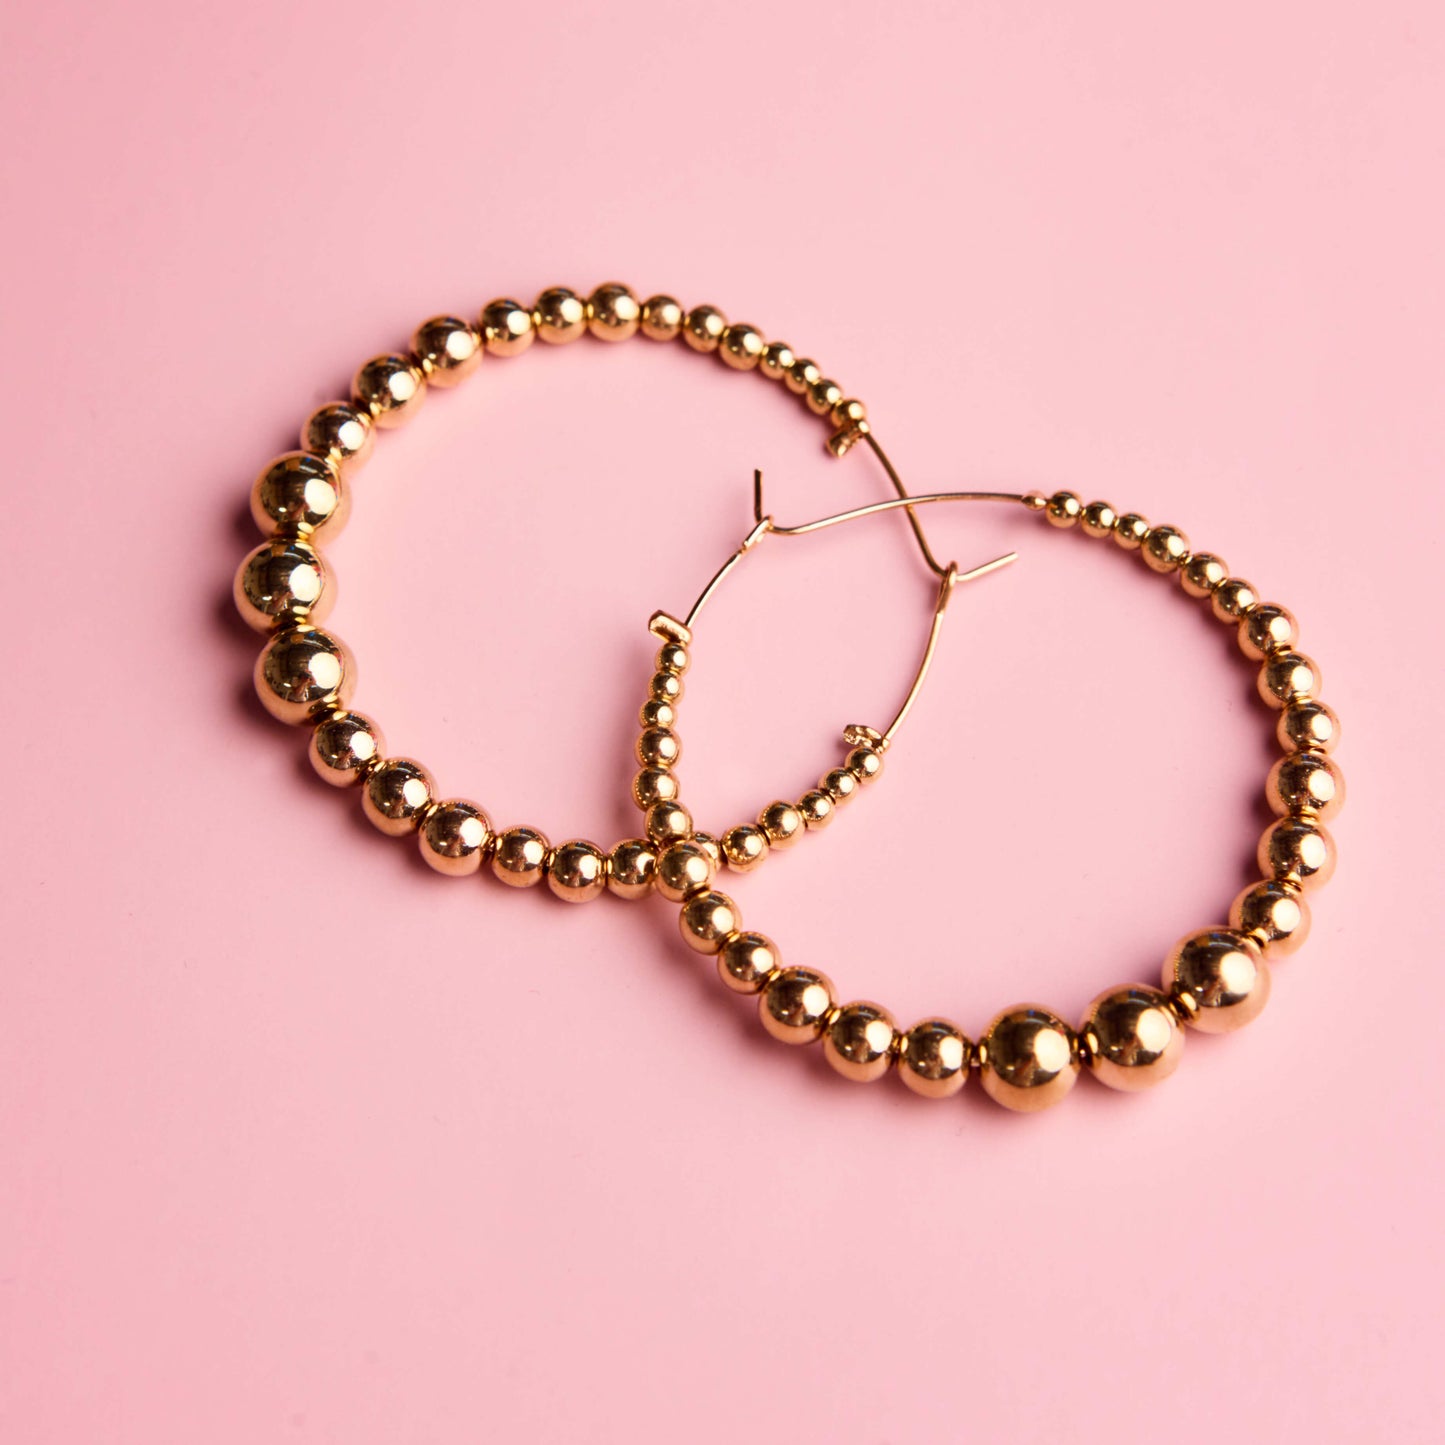 Large gold ball hoop